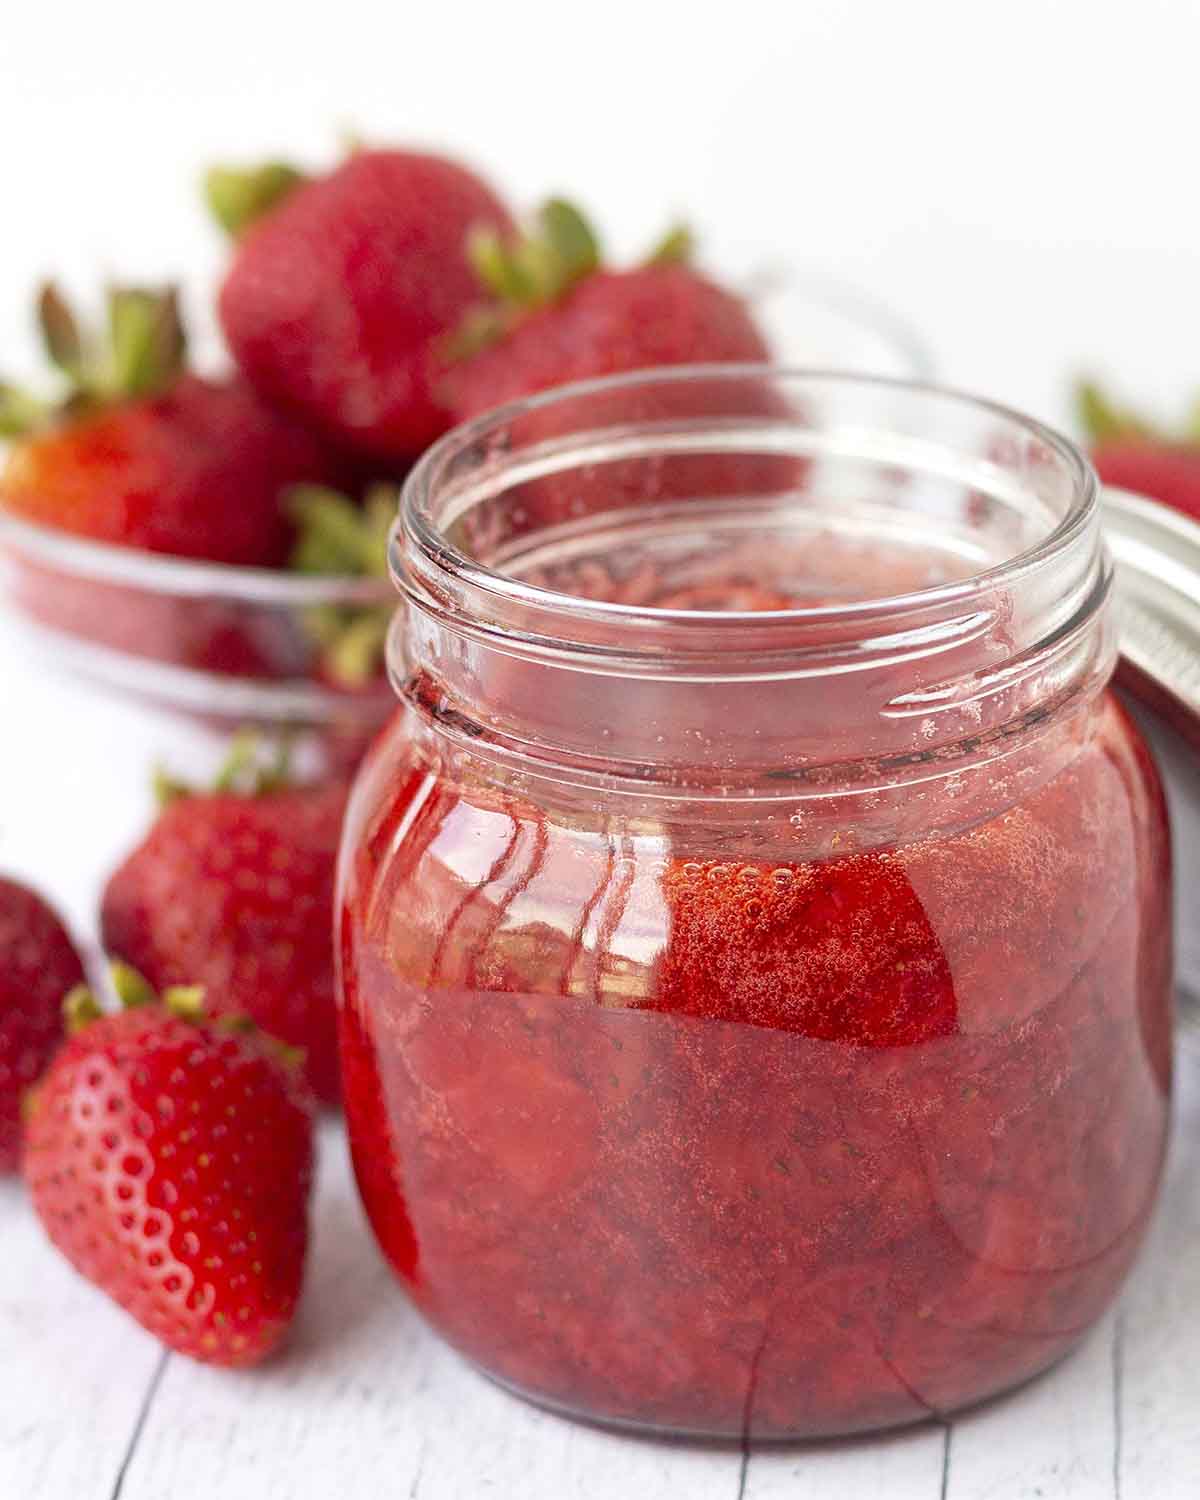 A glass jar of freshly made homemade strawberry sauce in a glass jar, there are fresh strawberries around the jar.